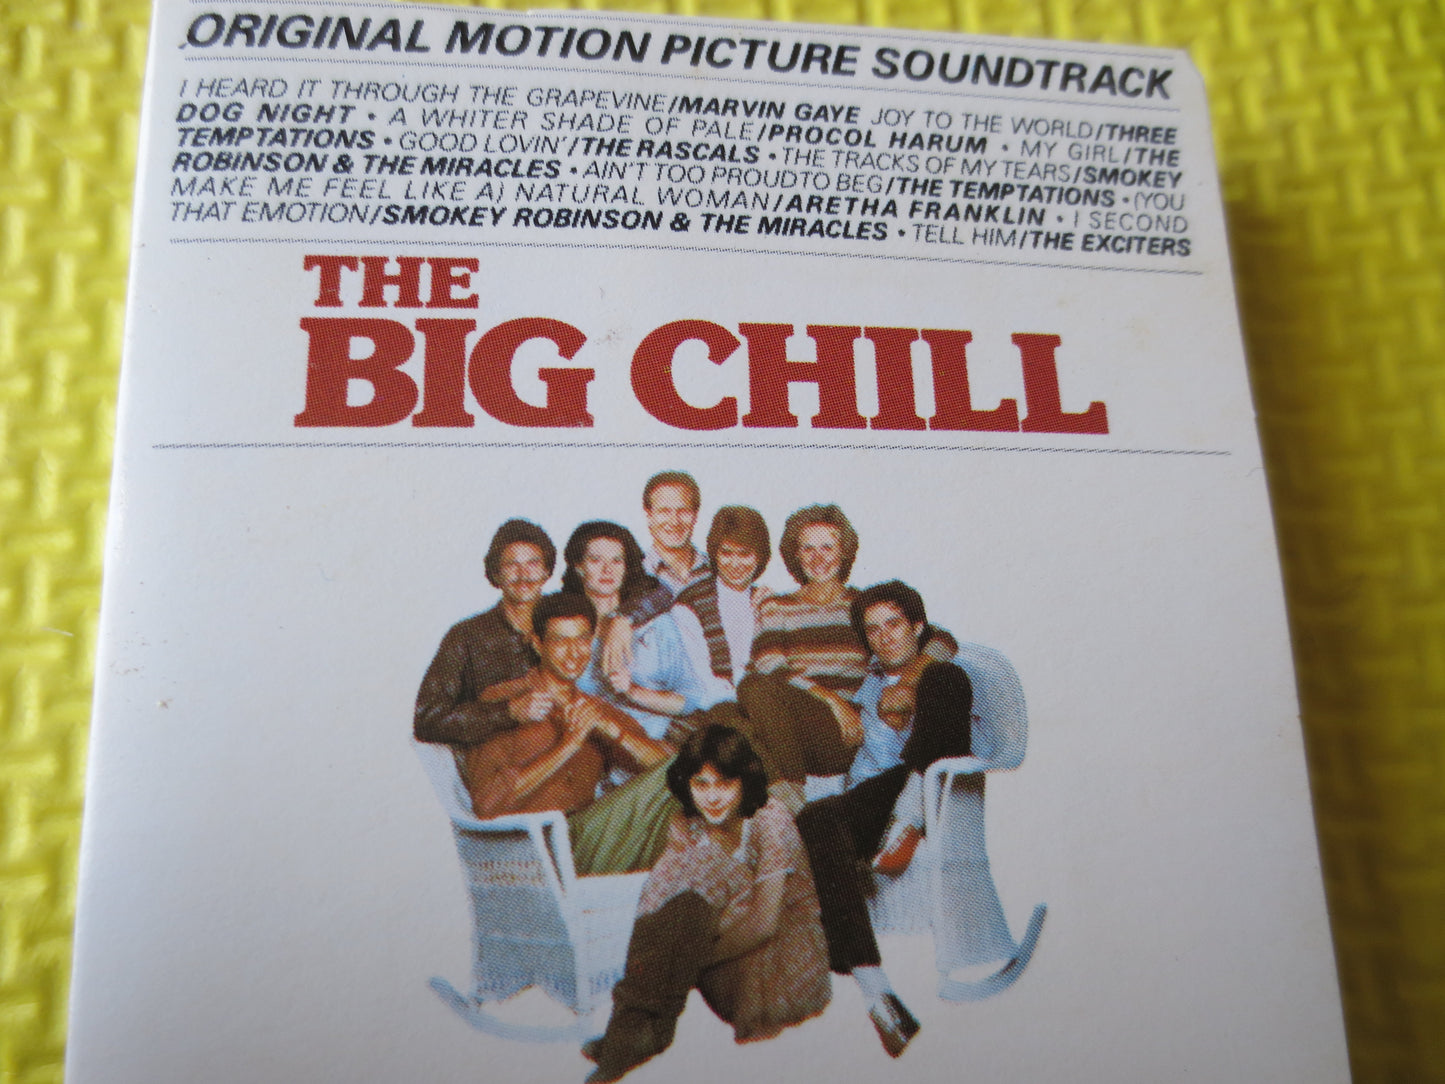 The BIG CHILL, SOUNDTRACK, Rock Music, Rock and Roll Tape, Rock Music Cassette, Music Cassettes, Abba Tapes, 1983 Cassette